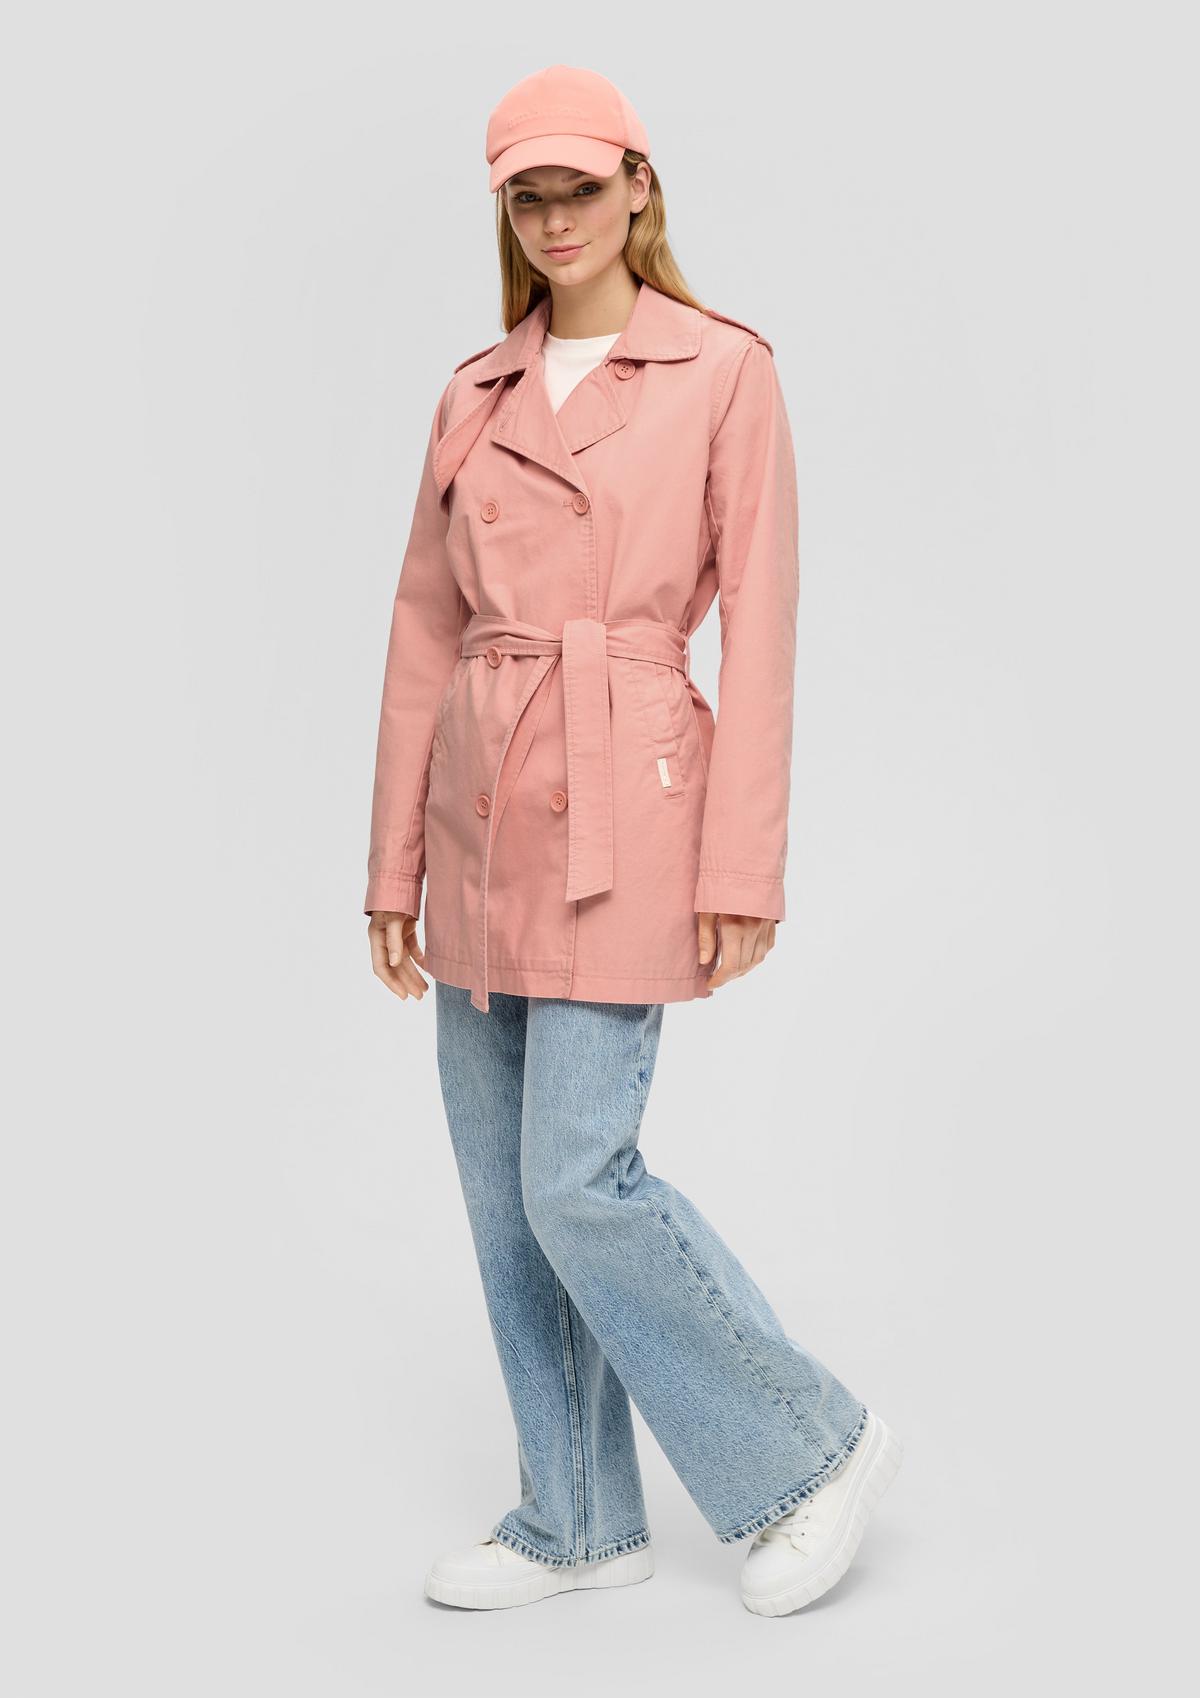 s.Oliver Trench coat with a tie-around belt